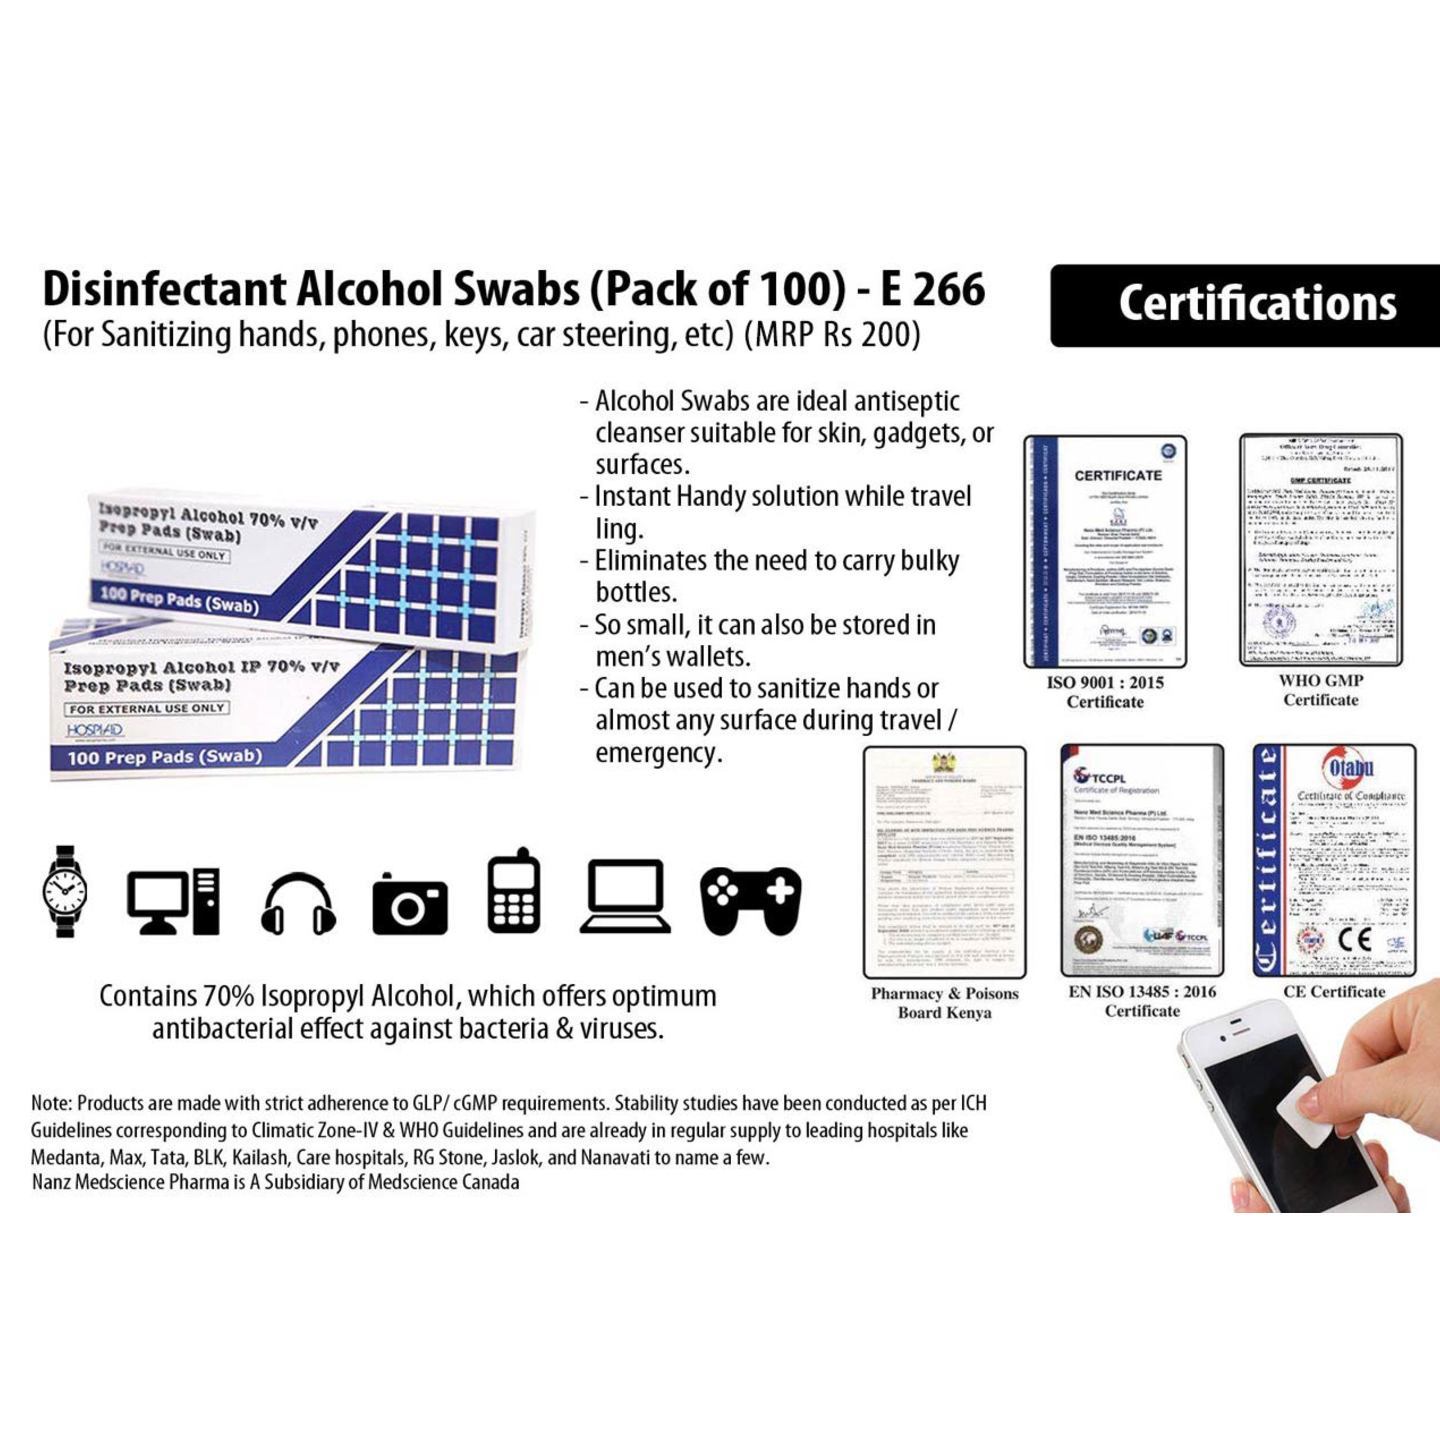 Disinfectant Alcohol Swabs Pack Of 100 For Sanitizing Hands, Phones, Keys, Car Steering, Etc